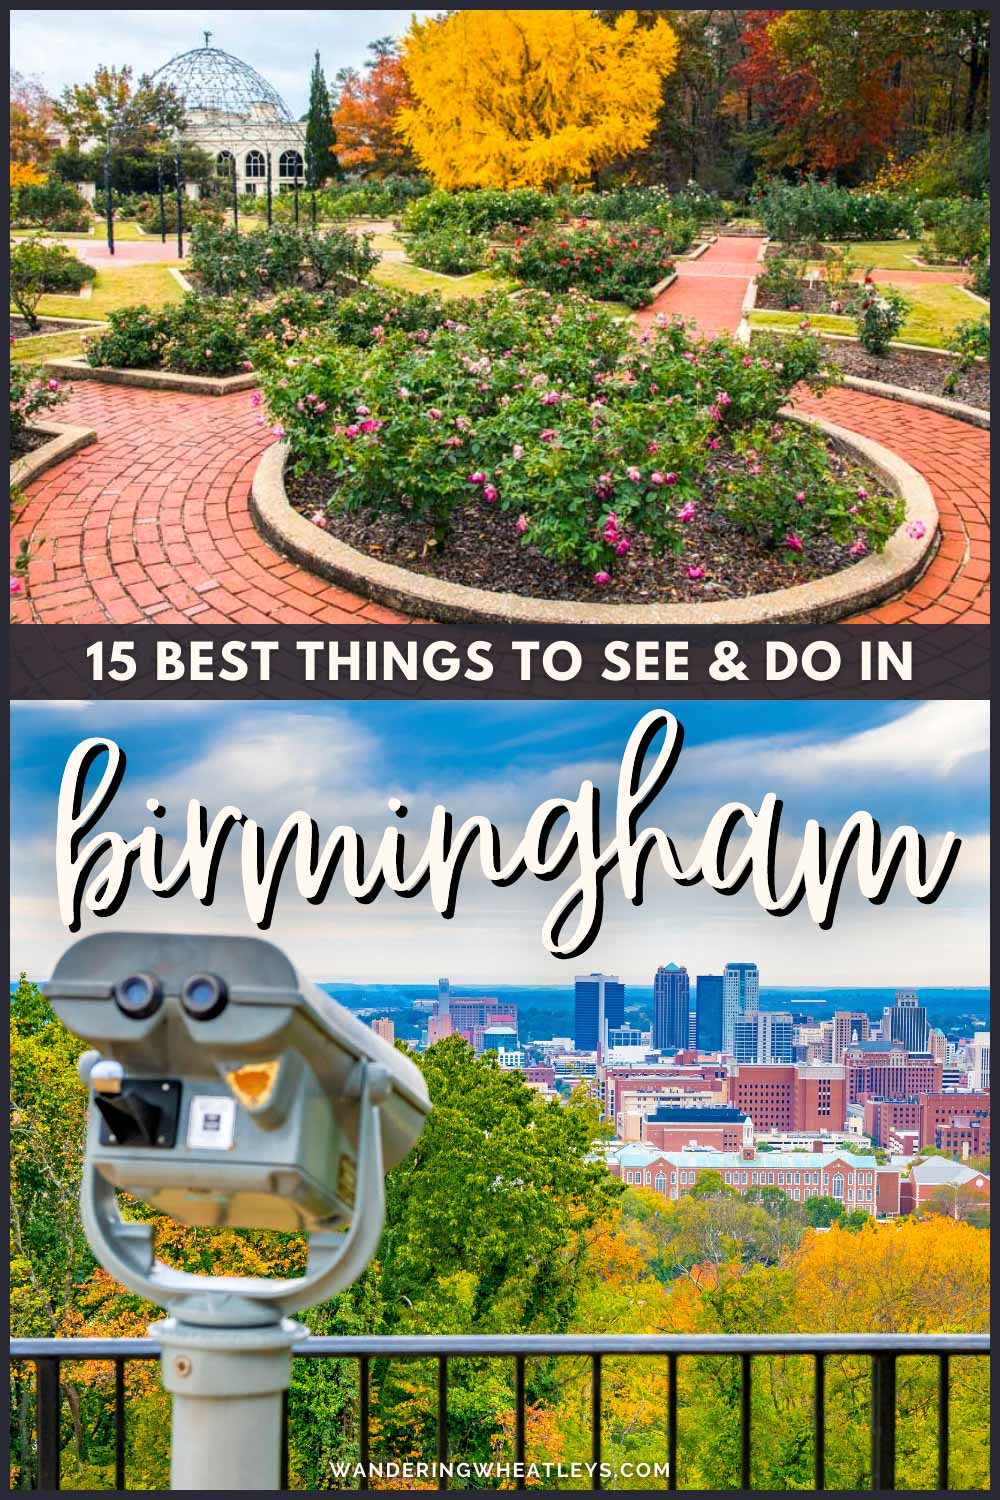 The Best Things to do in Birmingham, Alabama